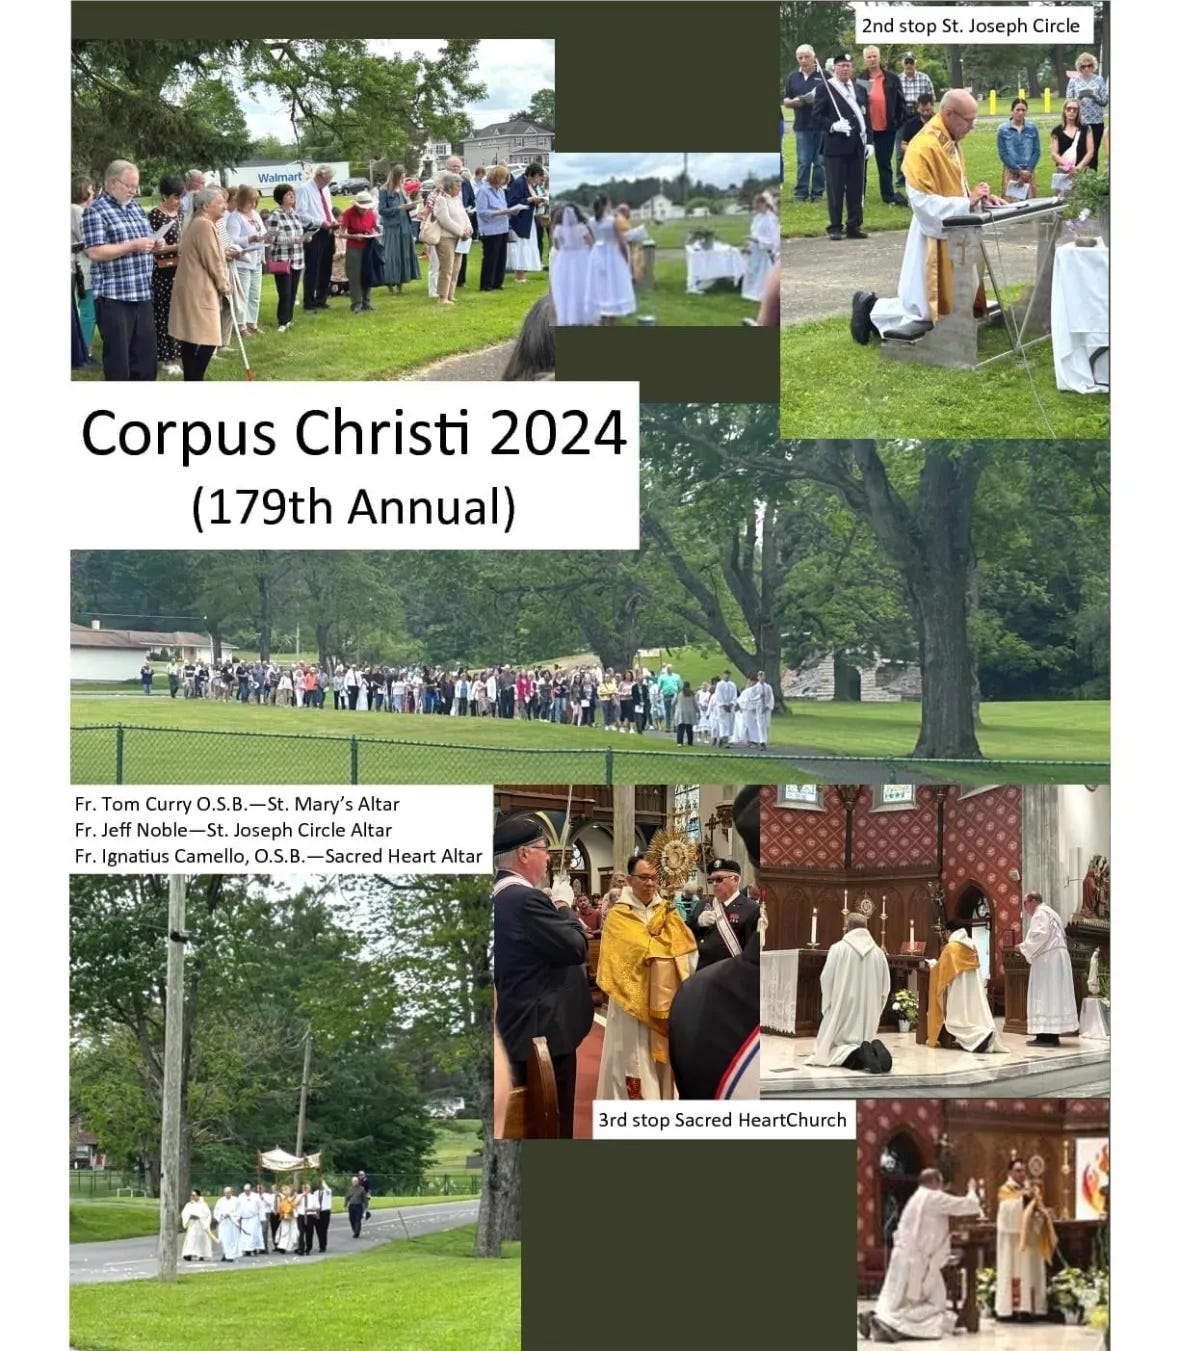 Photos from the 179th annual Corpus Christi processional.